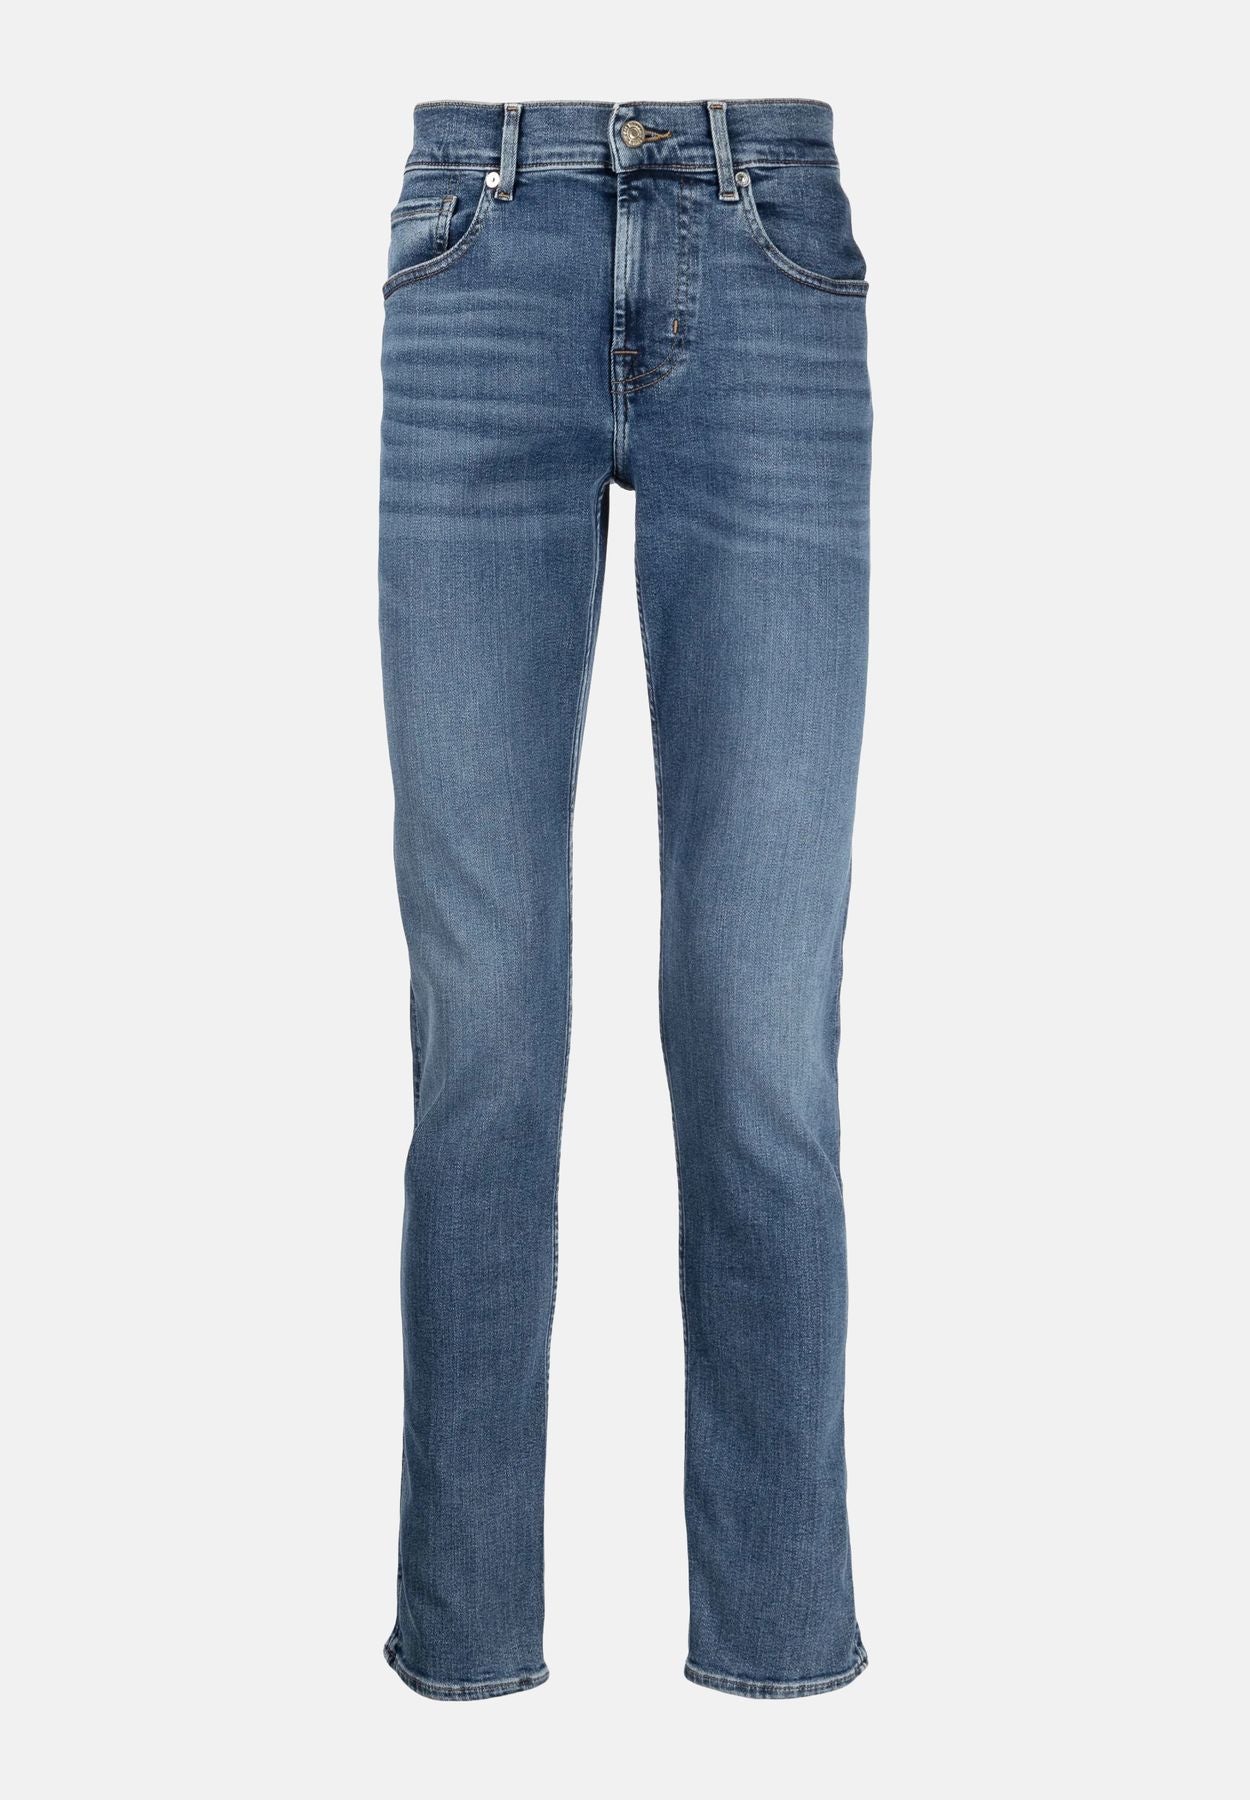 Jeans - 7 FOR ALL MANKIND product